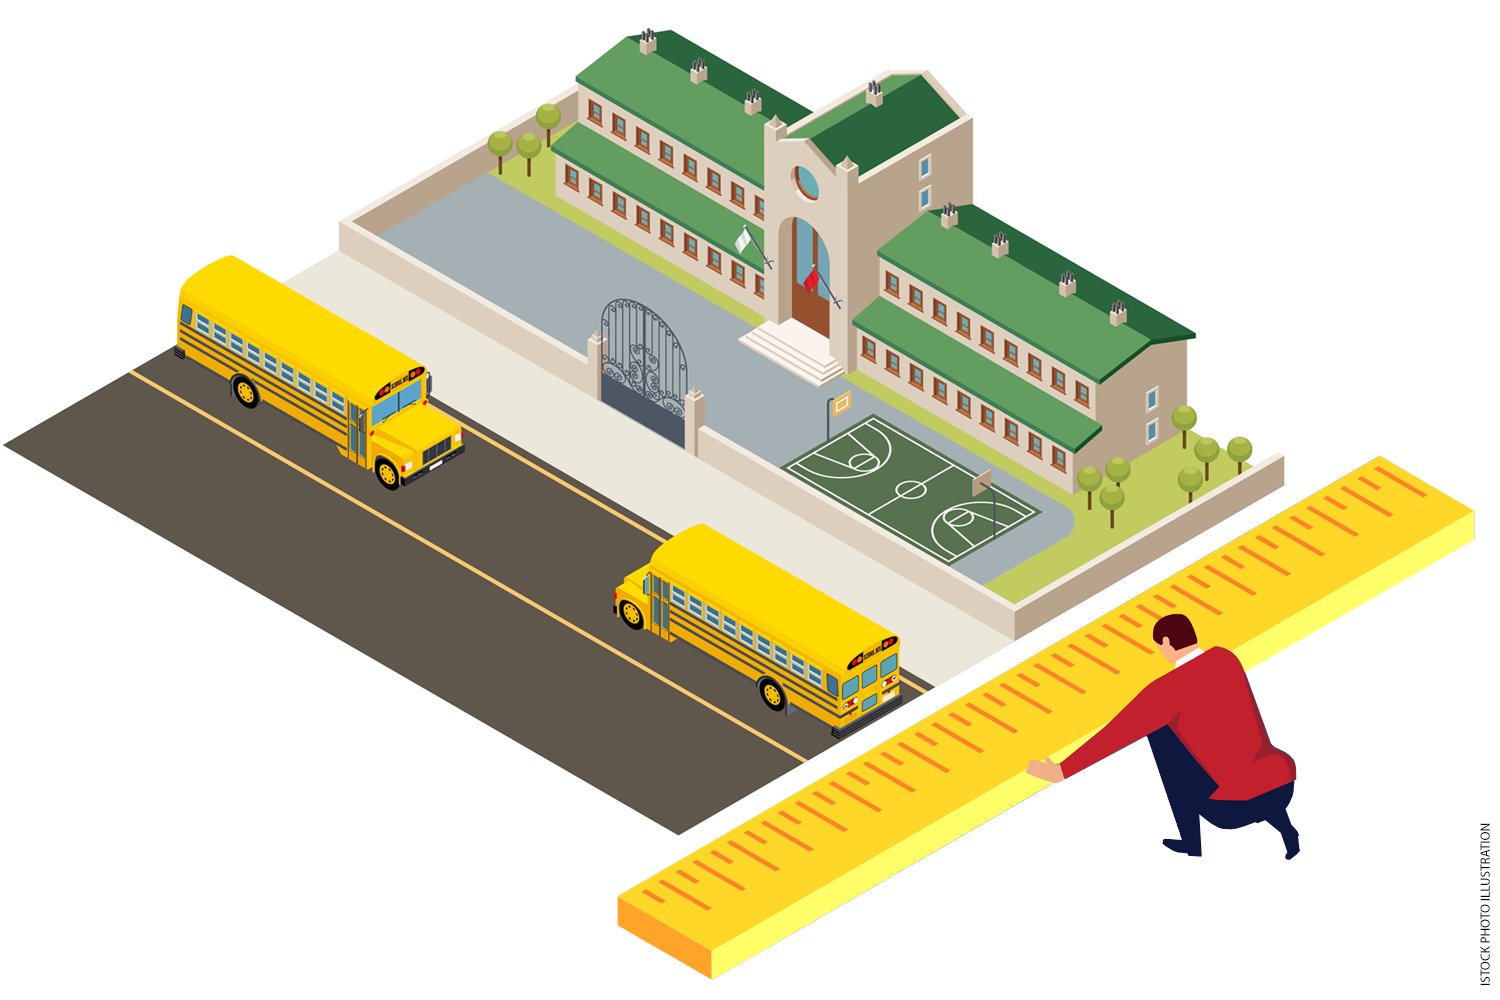 Illustration of a man measuring a school with an oversized ruler